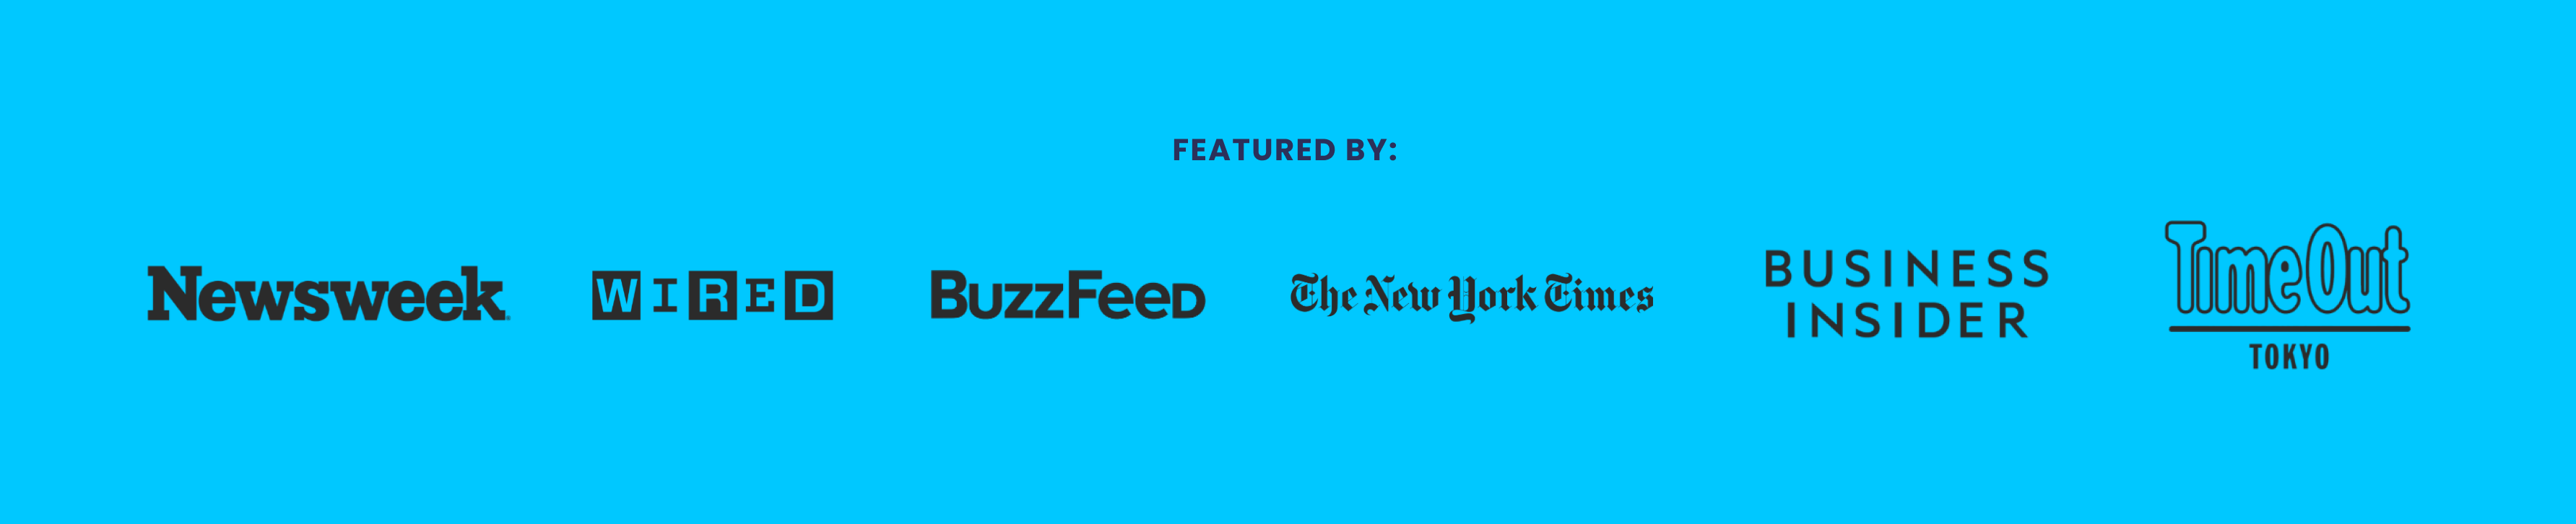 Newsweek, Wired, BuzzFeed, and more